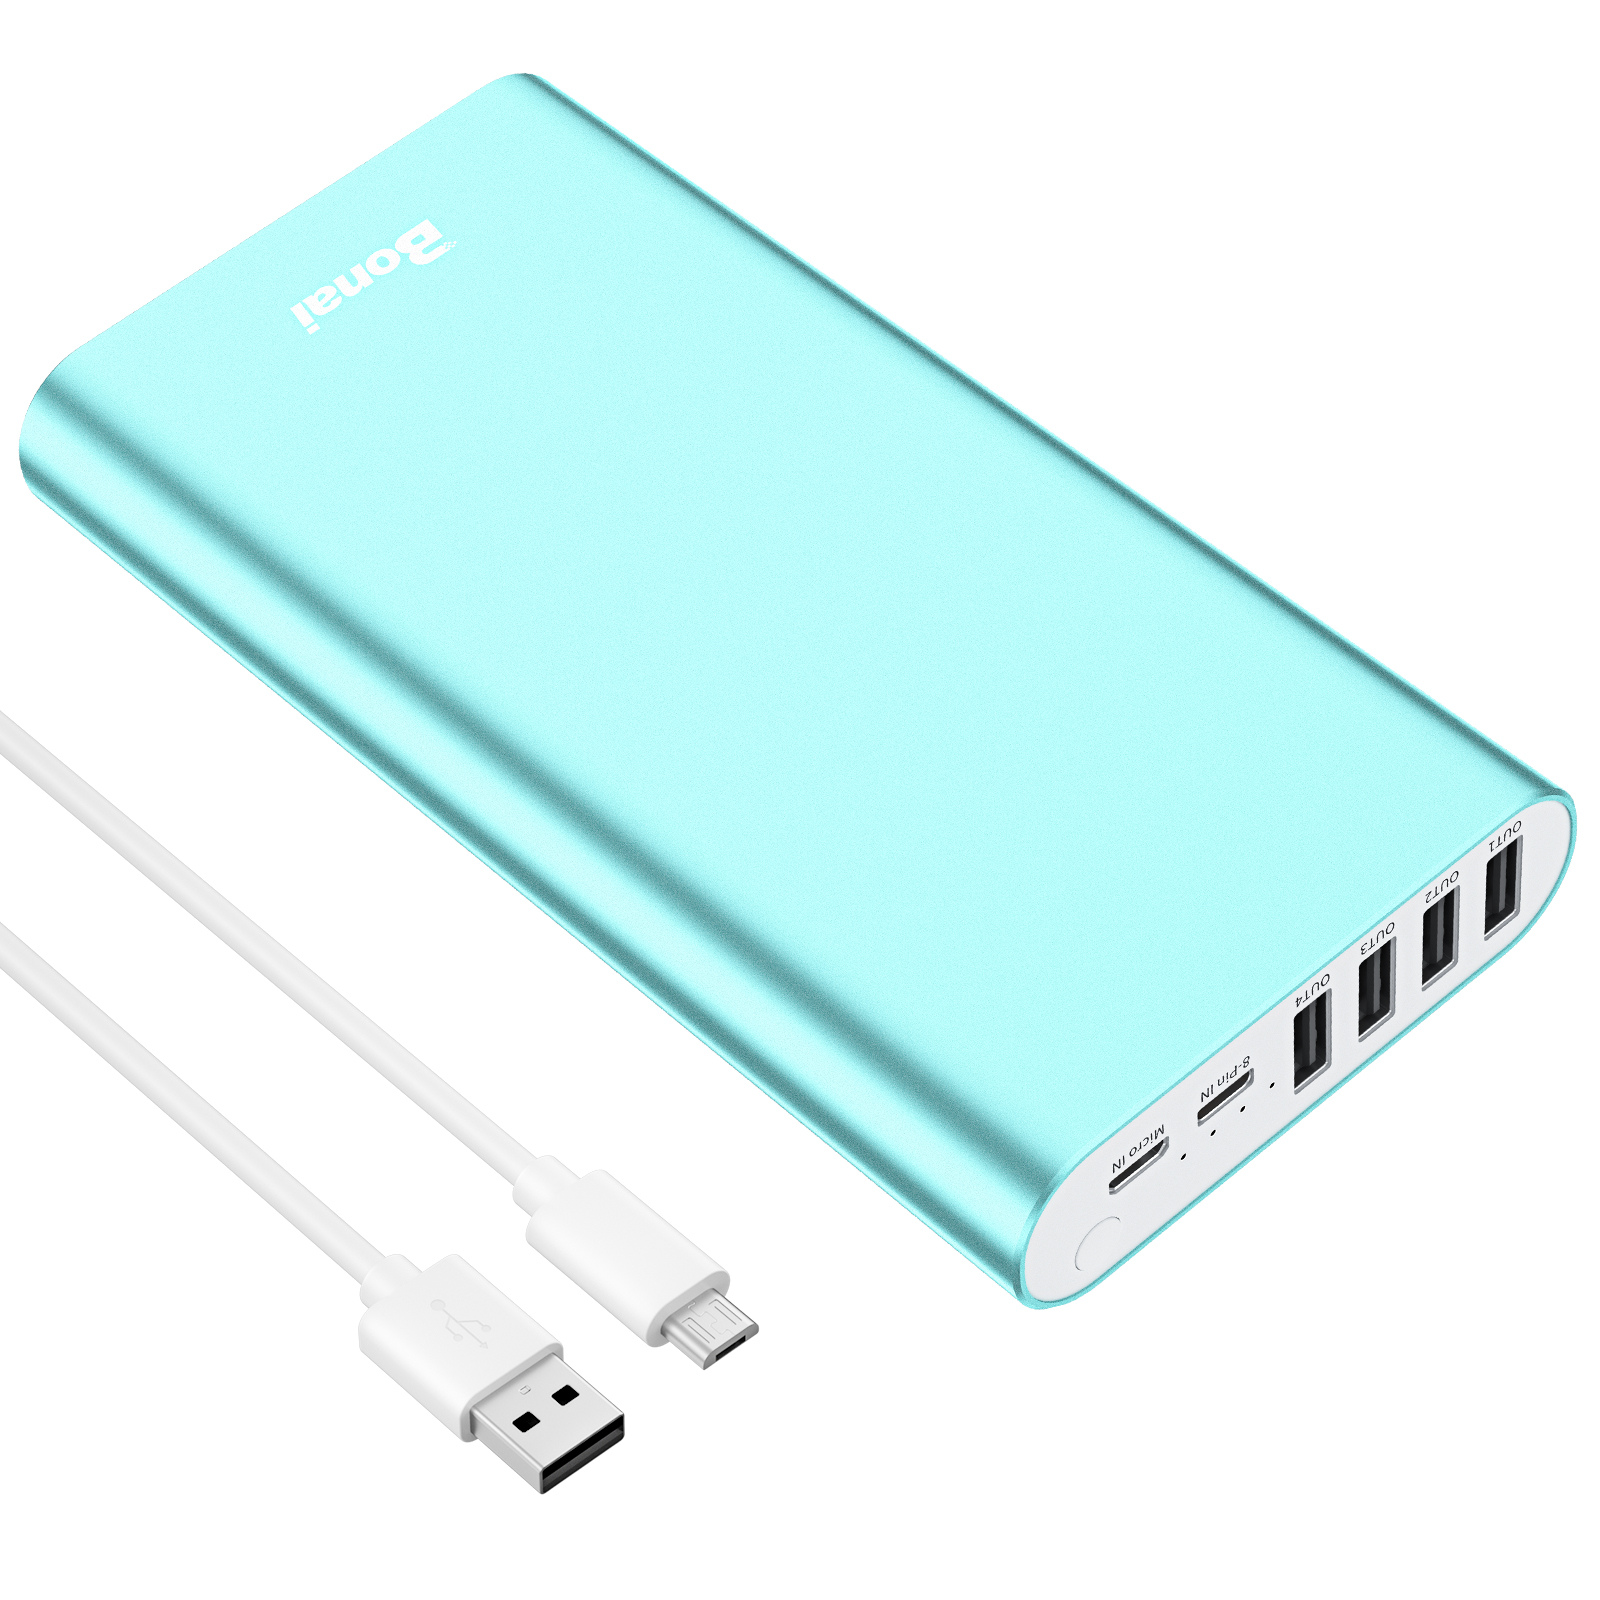 BONAI Portable Charger 20000mAh Power Bank 2.0A Max Input 4 USB Output, Aluminum Polymer External Battery Pack for Road Trip Camping Compatible with iPhone iPod iPad Samsung Smartphone Tablet - Mint